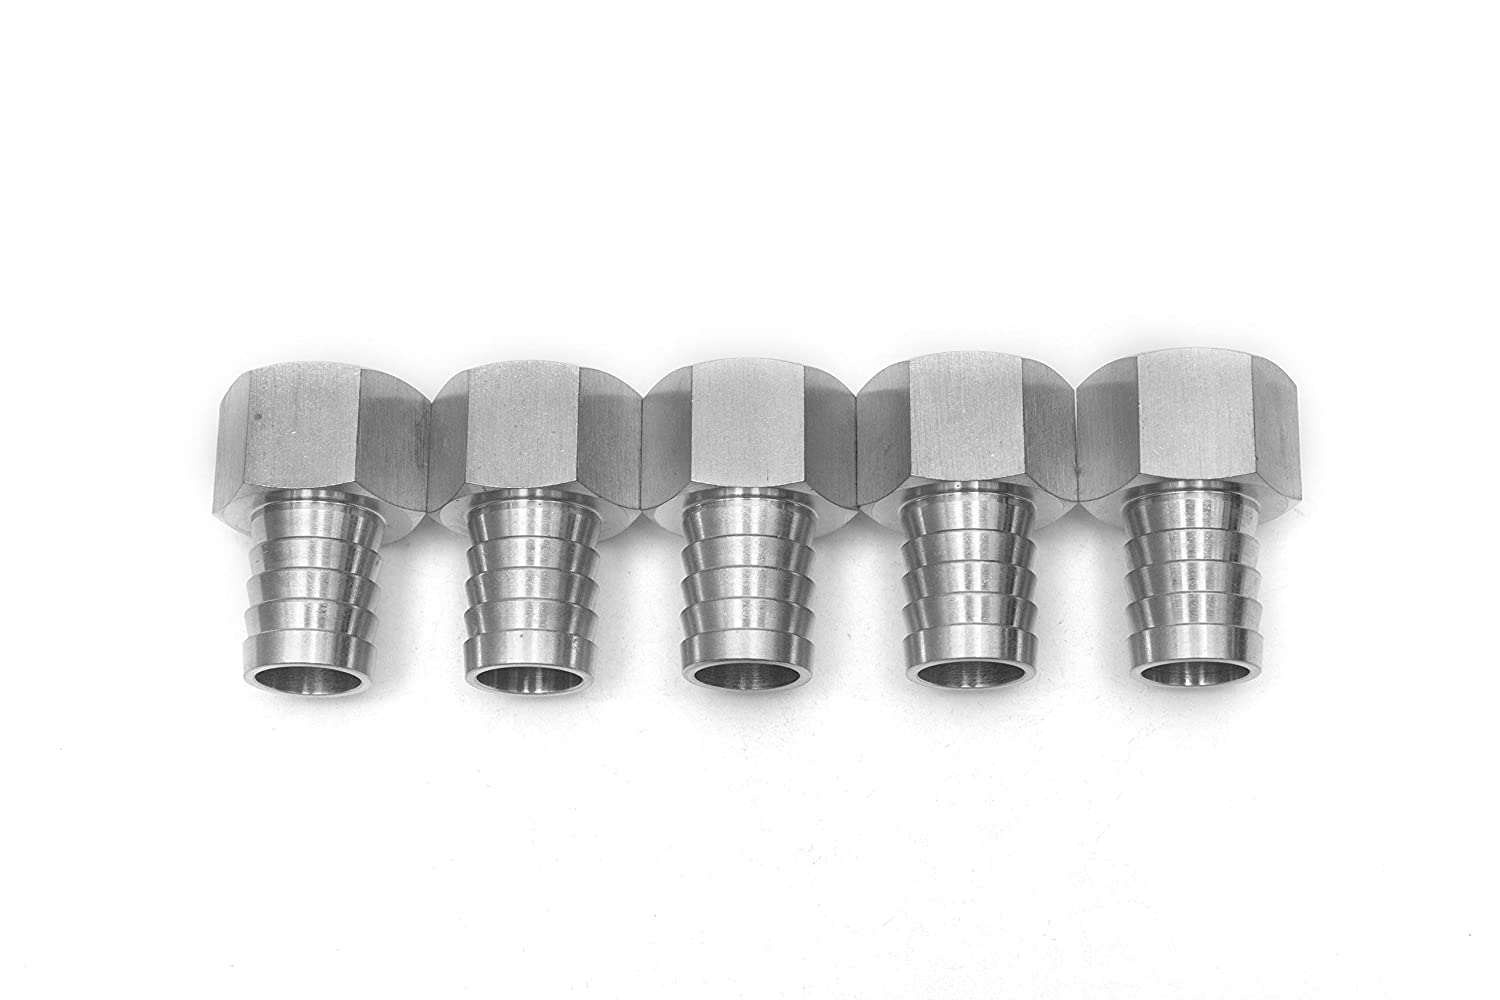 LTWFITTING Bar Production Stainless Steel 316 Barb Fitting Coupler 3/4 Inch Hose ID x 3/4 Inch Female NPT Air Fuel Water (Pack of 5)